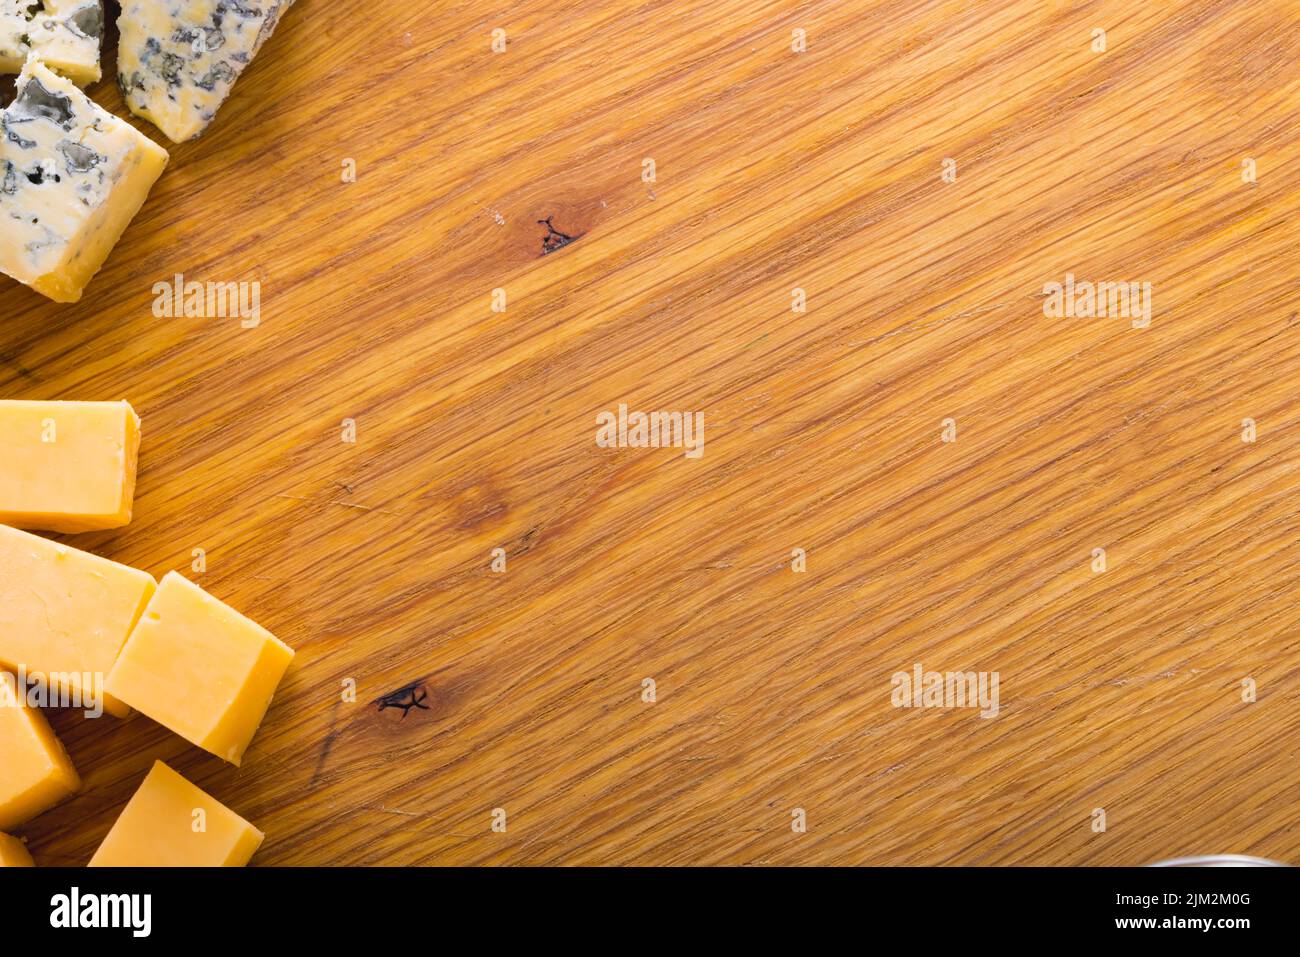 Overhead view of various cheese slices on wooden board, copy space Stock Photo